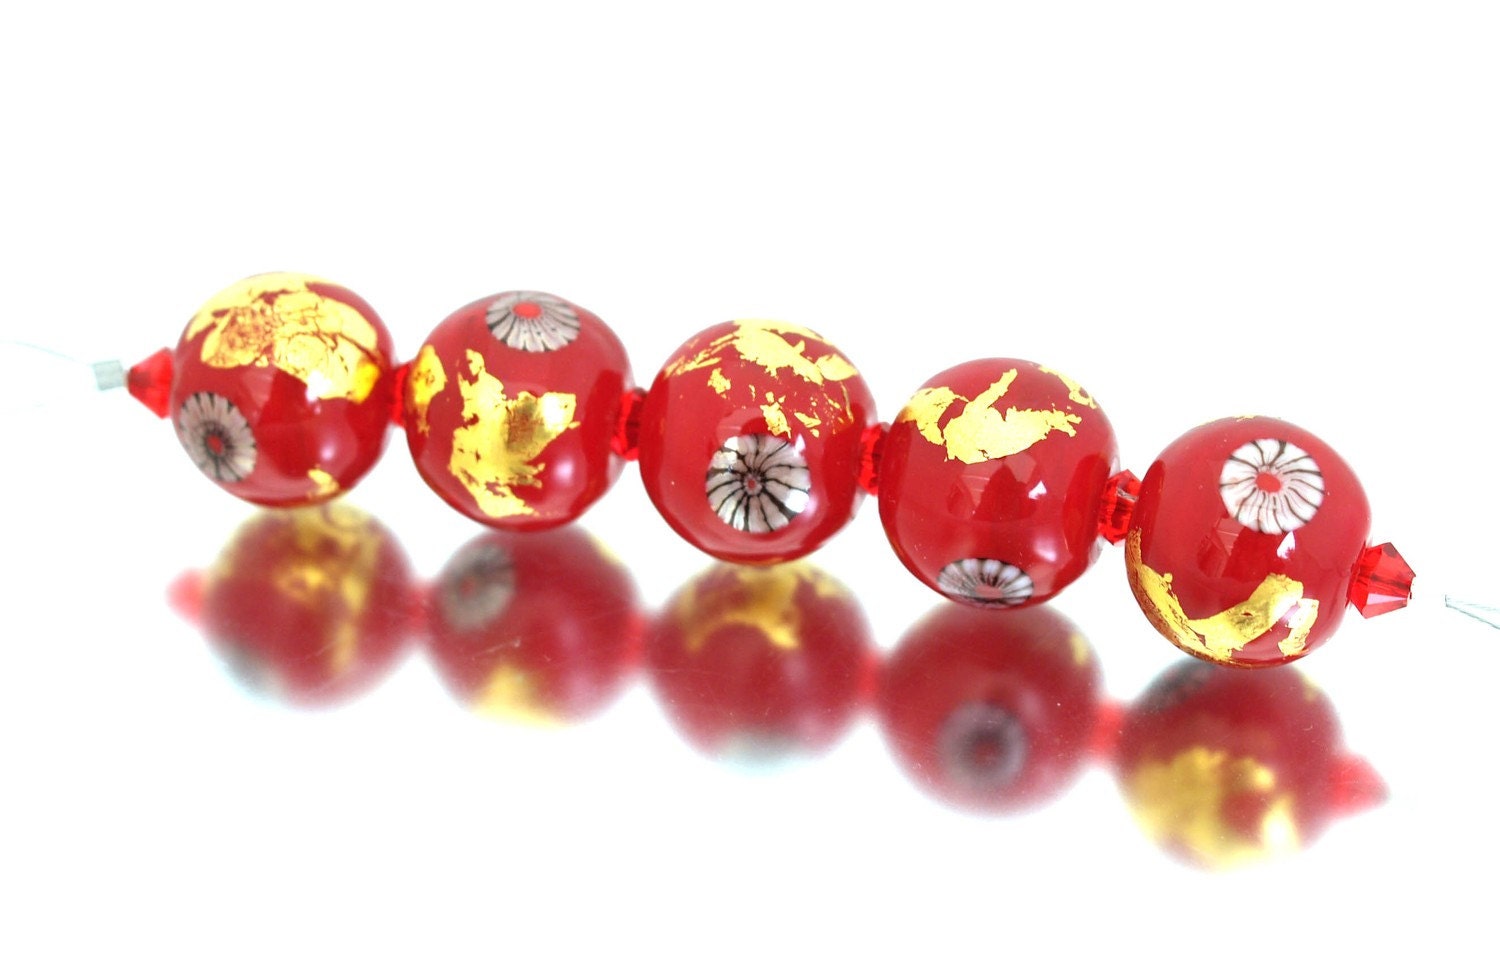 A set of five handmade glass beads in a beautiful scarlet red decorated with gold foil and murrini in black, white and red. This opulent set has an oriental look and would make a stunning piece of jewellery.